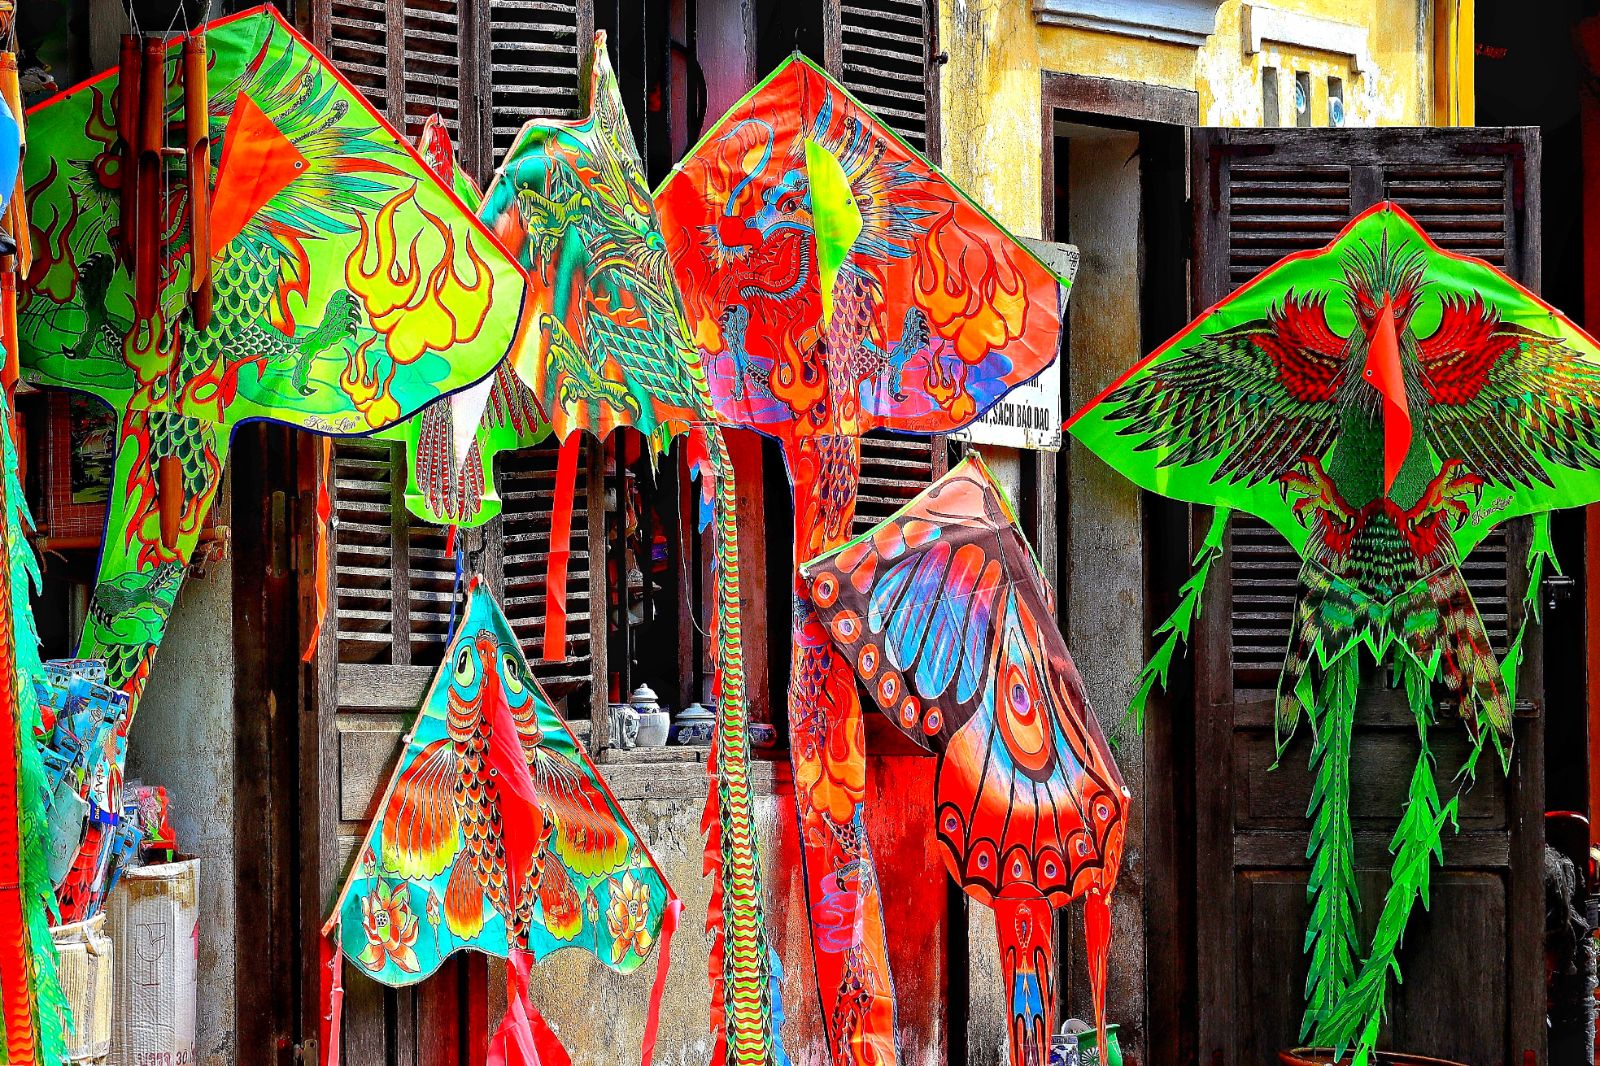 Handmade kites crafted in Hoi An